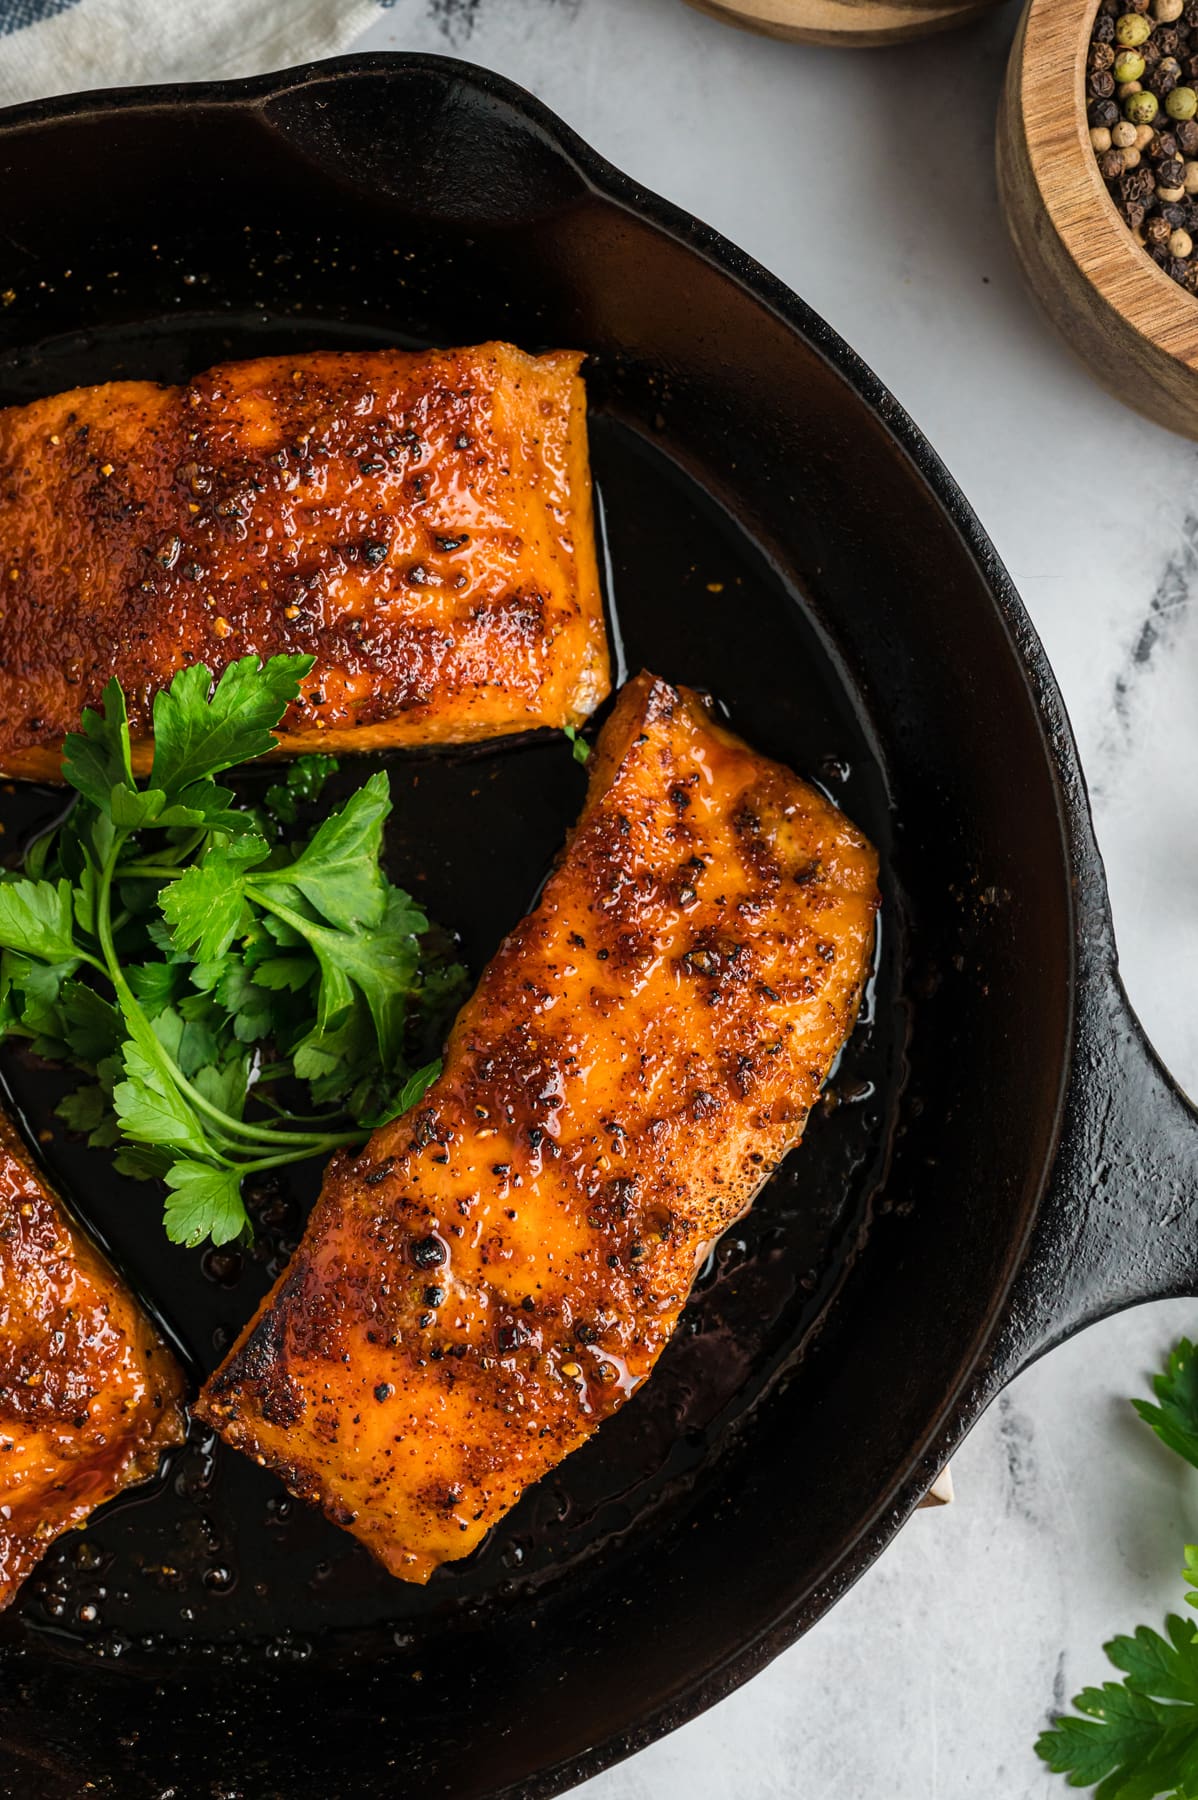 Overhead view of honey glazed salmon in a skillet